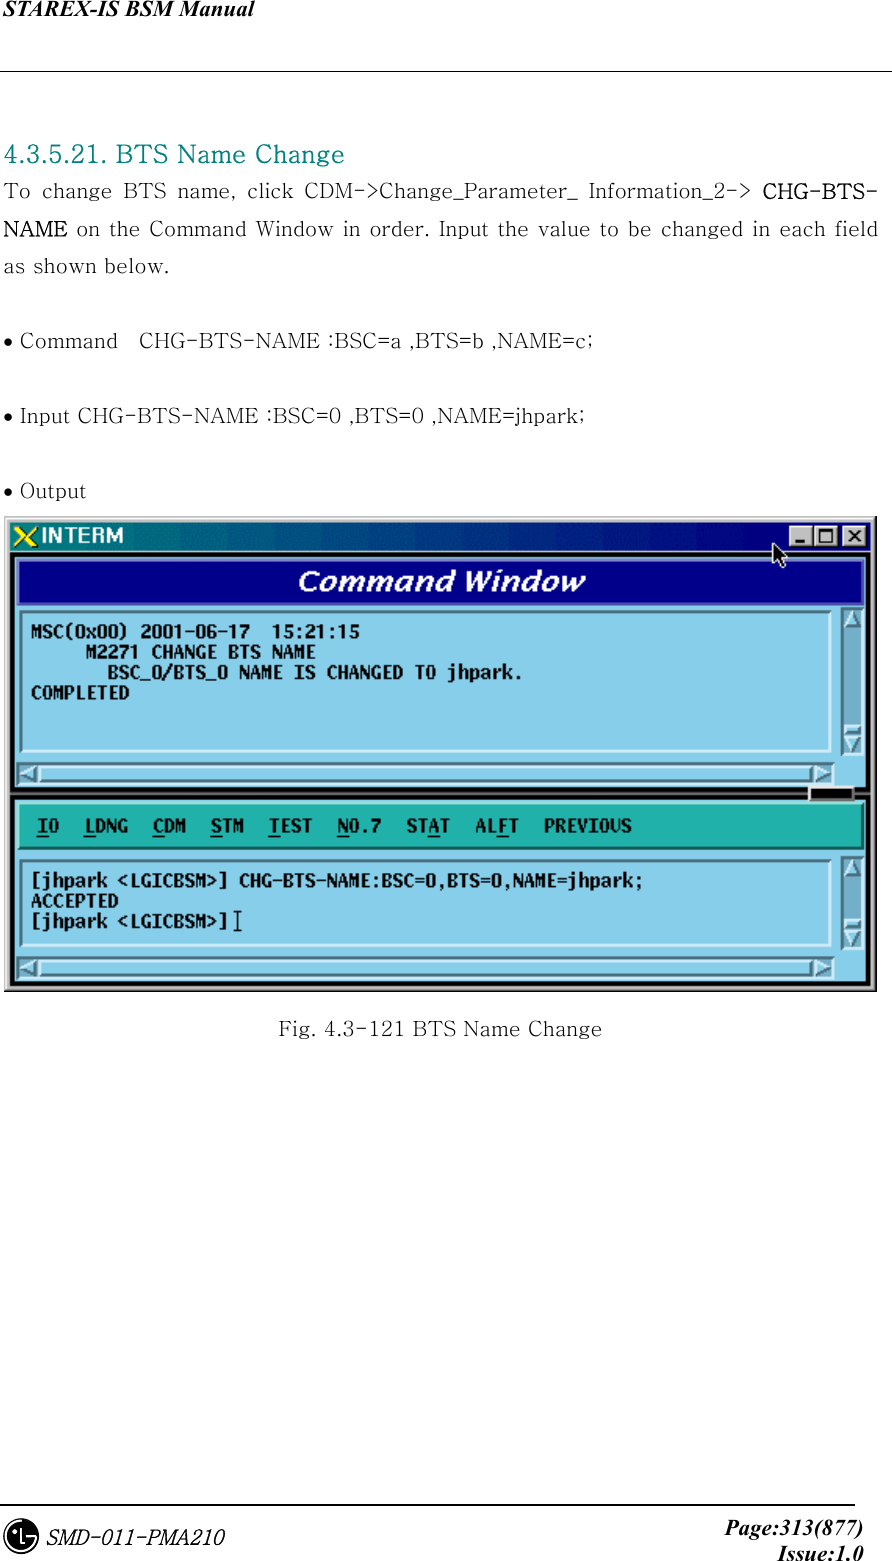 STAREX-IS BSM Manual     Page:313(877)Issue:1.0SMD-011-PMA210  4.3.5.21. BTS Name Change To  change  BTS  name,  click  CDM-&gt;Change_Parameter_  Information_2-&gt;  CHG-BTS-NAME on the Command Window in order. Input the value to be changed in each field as shown below.  • Command    CHG-BTS-NAME :BSC=a ,BTS=b ,NAME=c;  • Input CHG-BTS-NAME :BSC=0 ,BTS=0 ,NAME=jhpark;  • Output  Fig. 4.3-121 BTS Name Change 